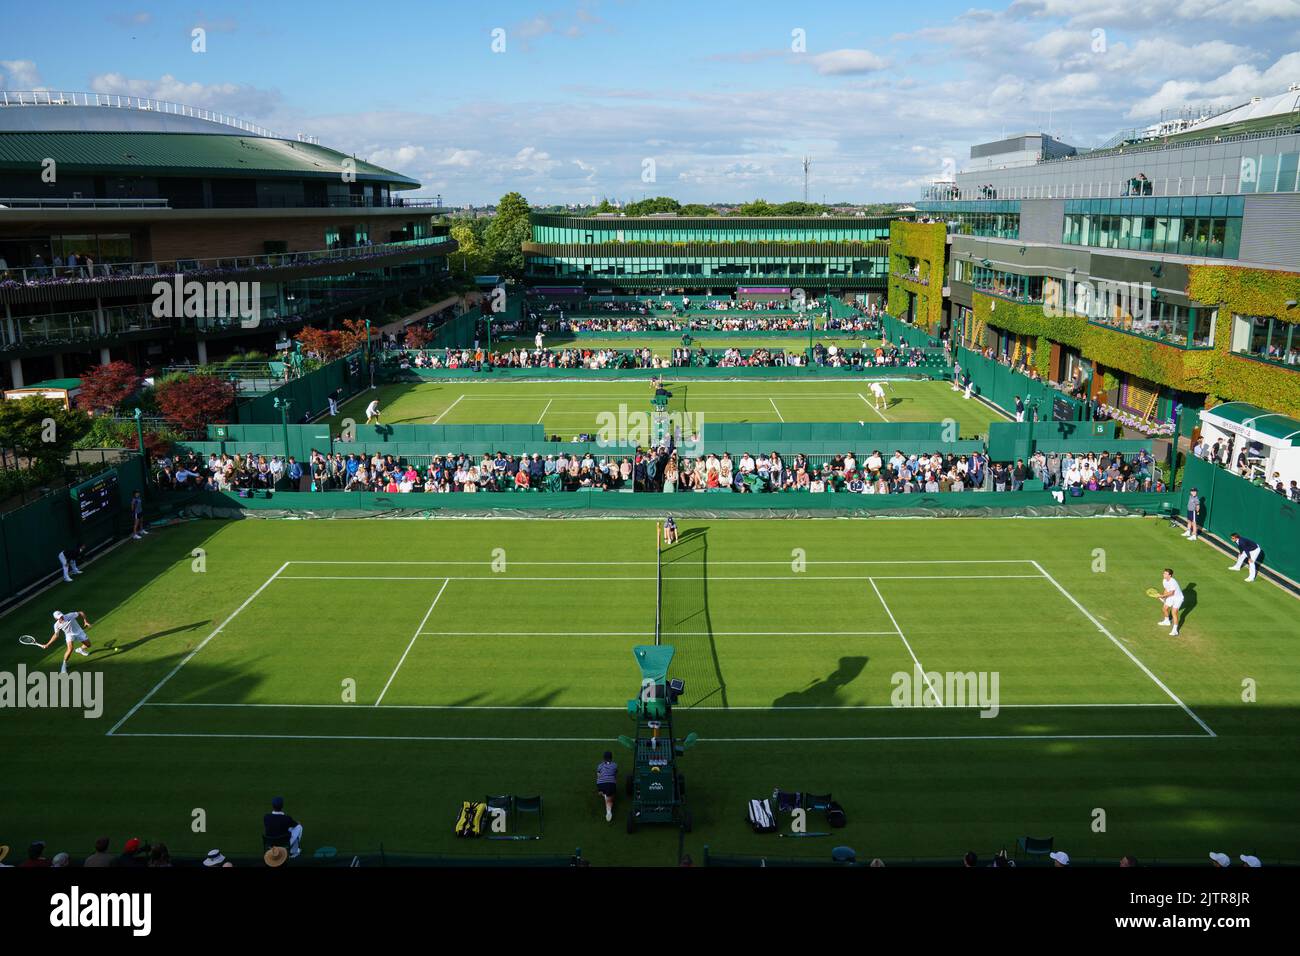 General Views of Court 14 with Miomir Kecmanovic and John Millman at The Championships 2022. Held at The All England Lawn Tennis Club, Wimbledon. Stock Photo